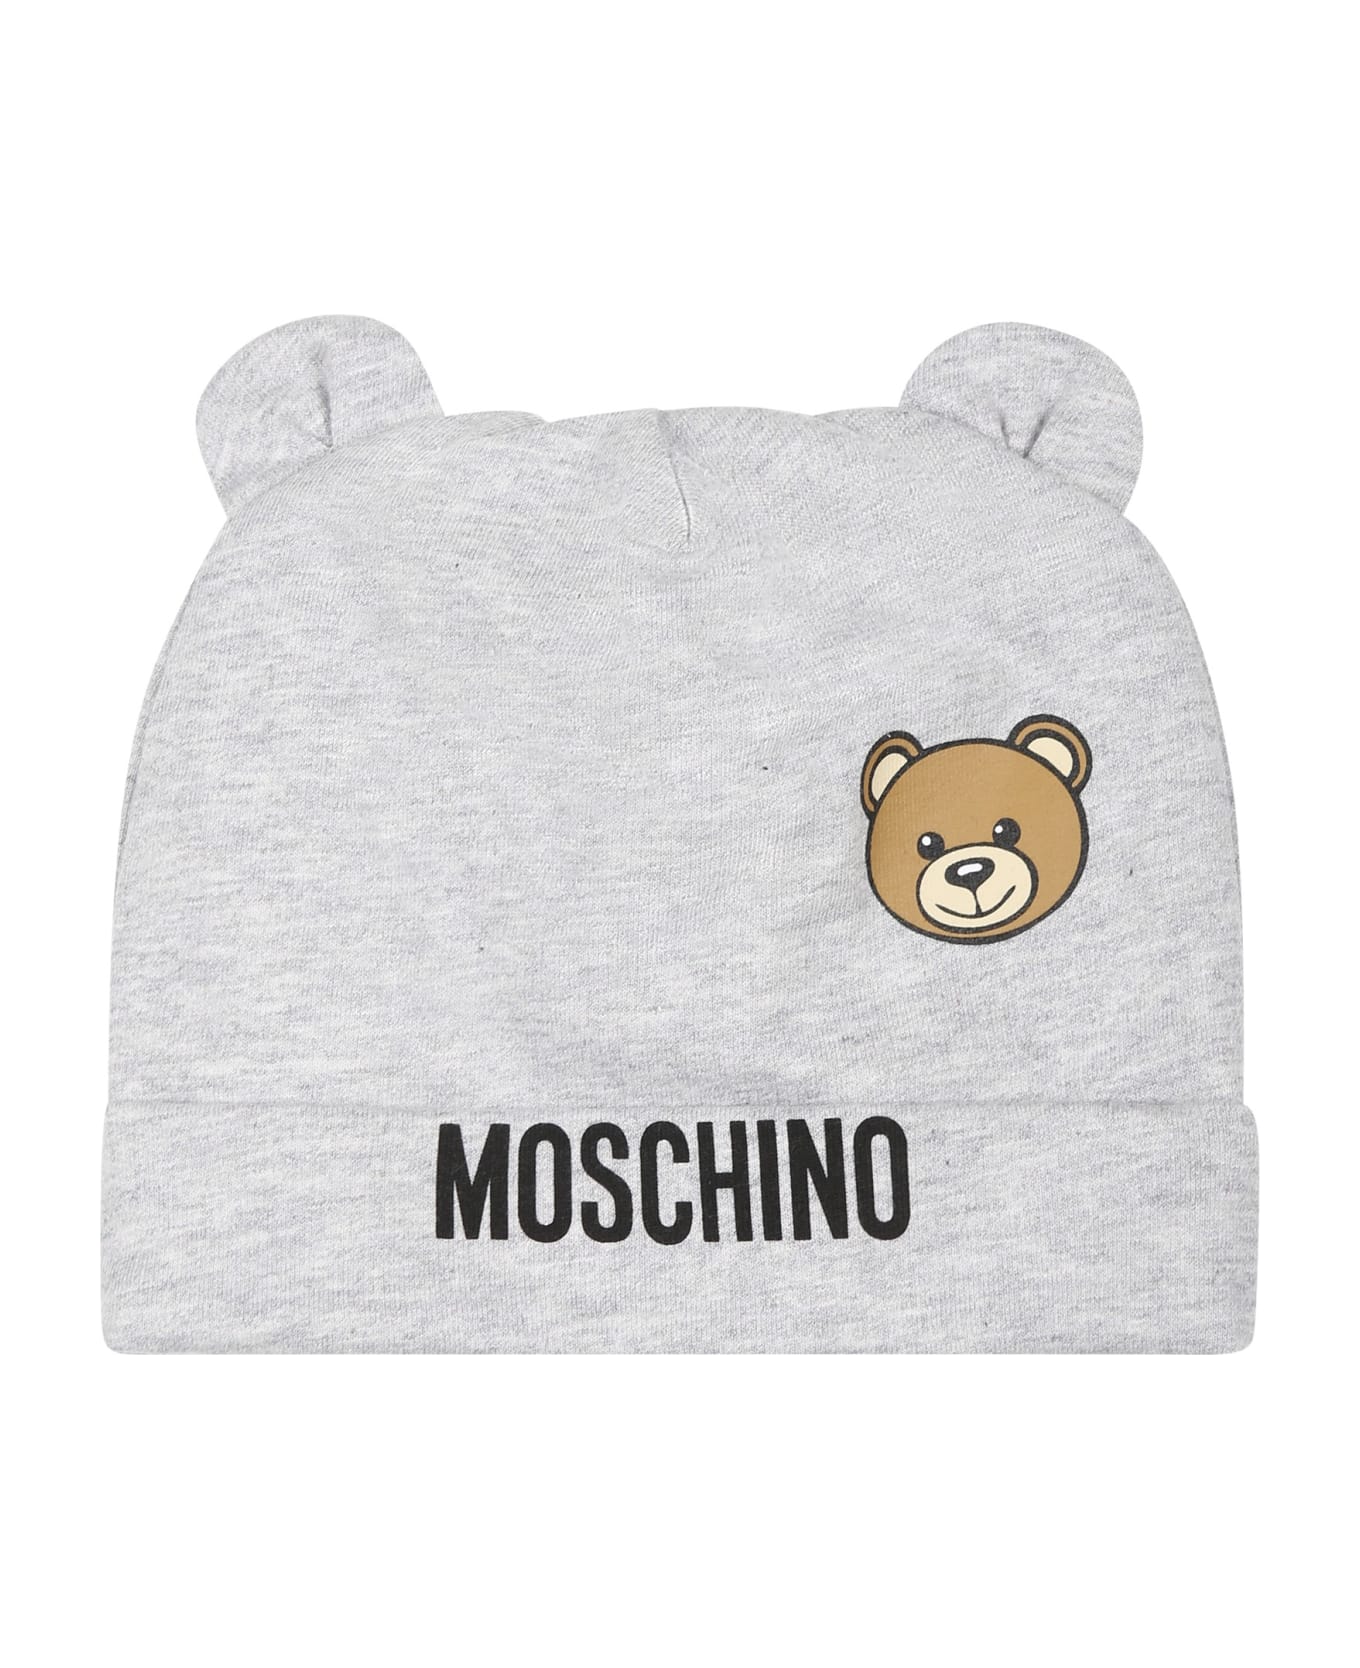 Moschino Grey Set For Babykids With Teddy Bear And Logo - Grey アクセサリー＆ギフト